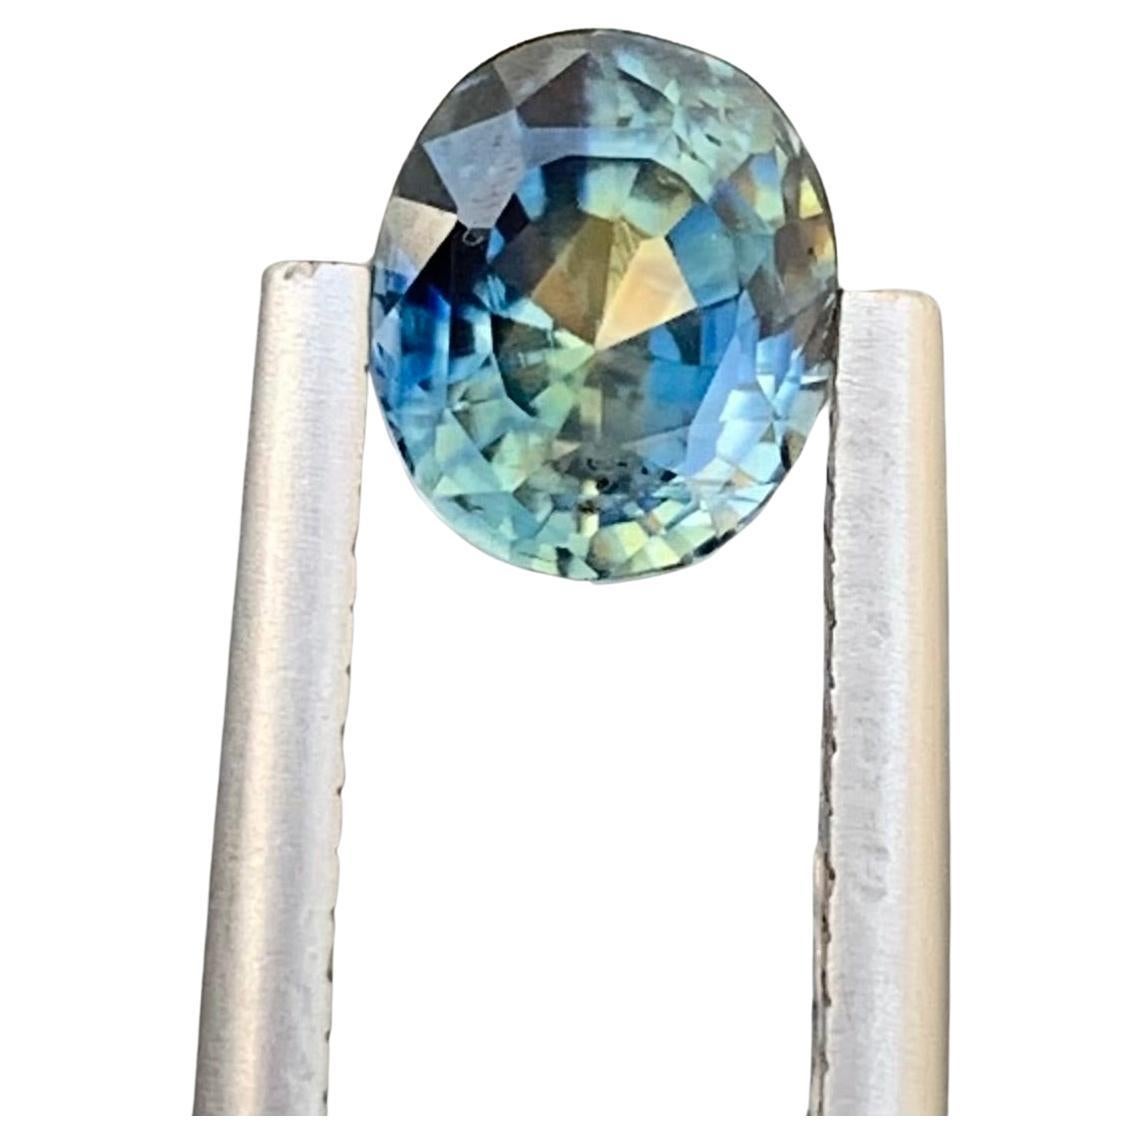 1.55 Carat Faceted Yellowish Blue Sapphire Oval Shape Gem From Madagascar Mine